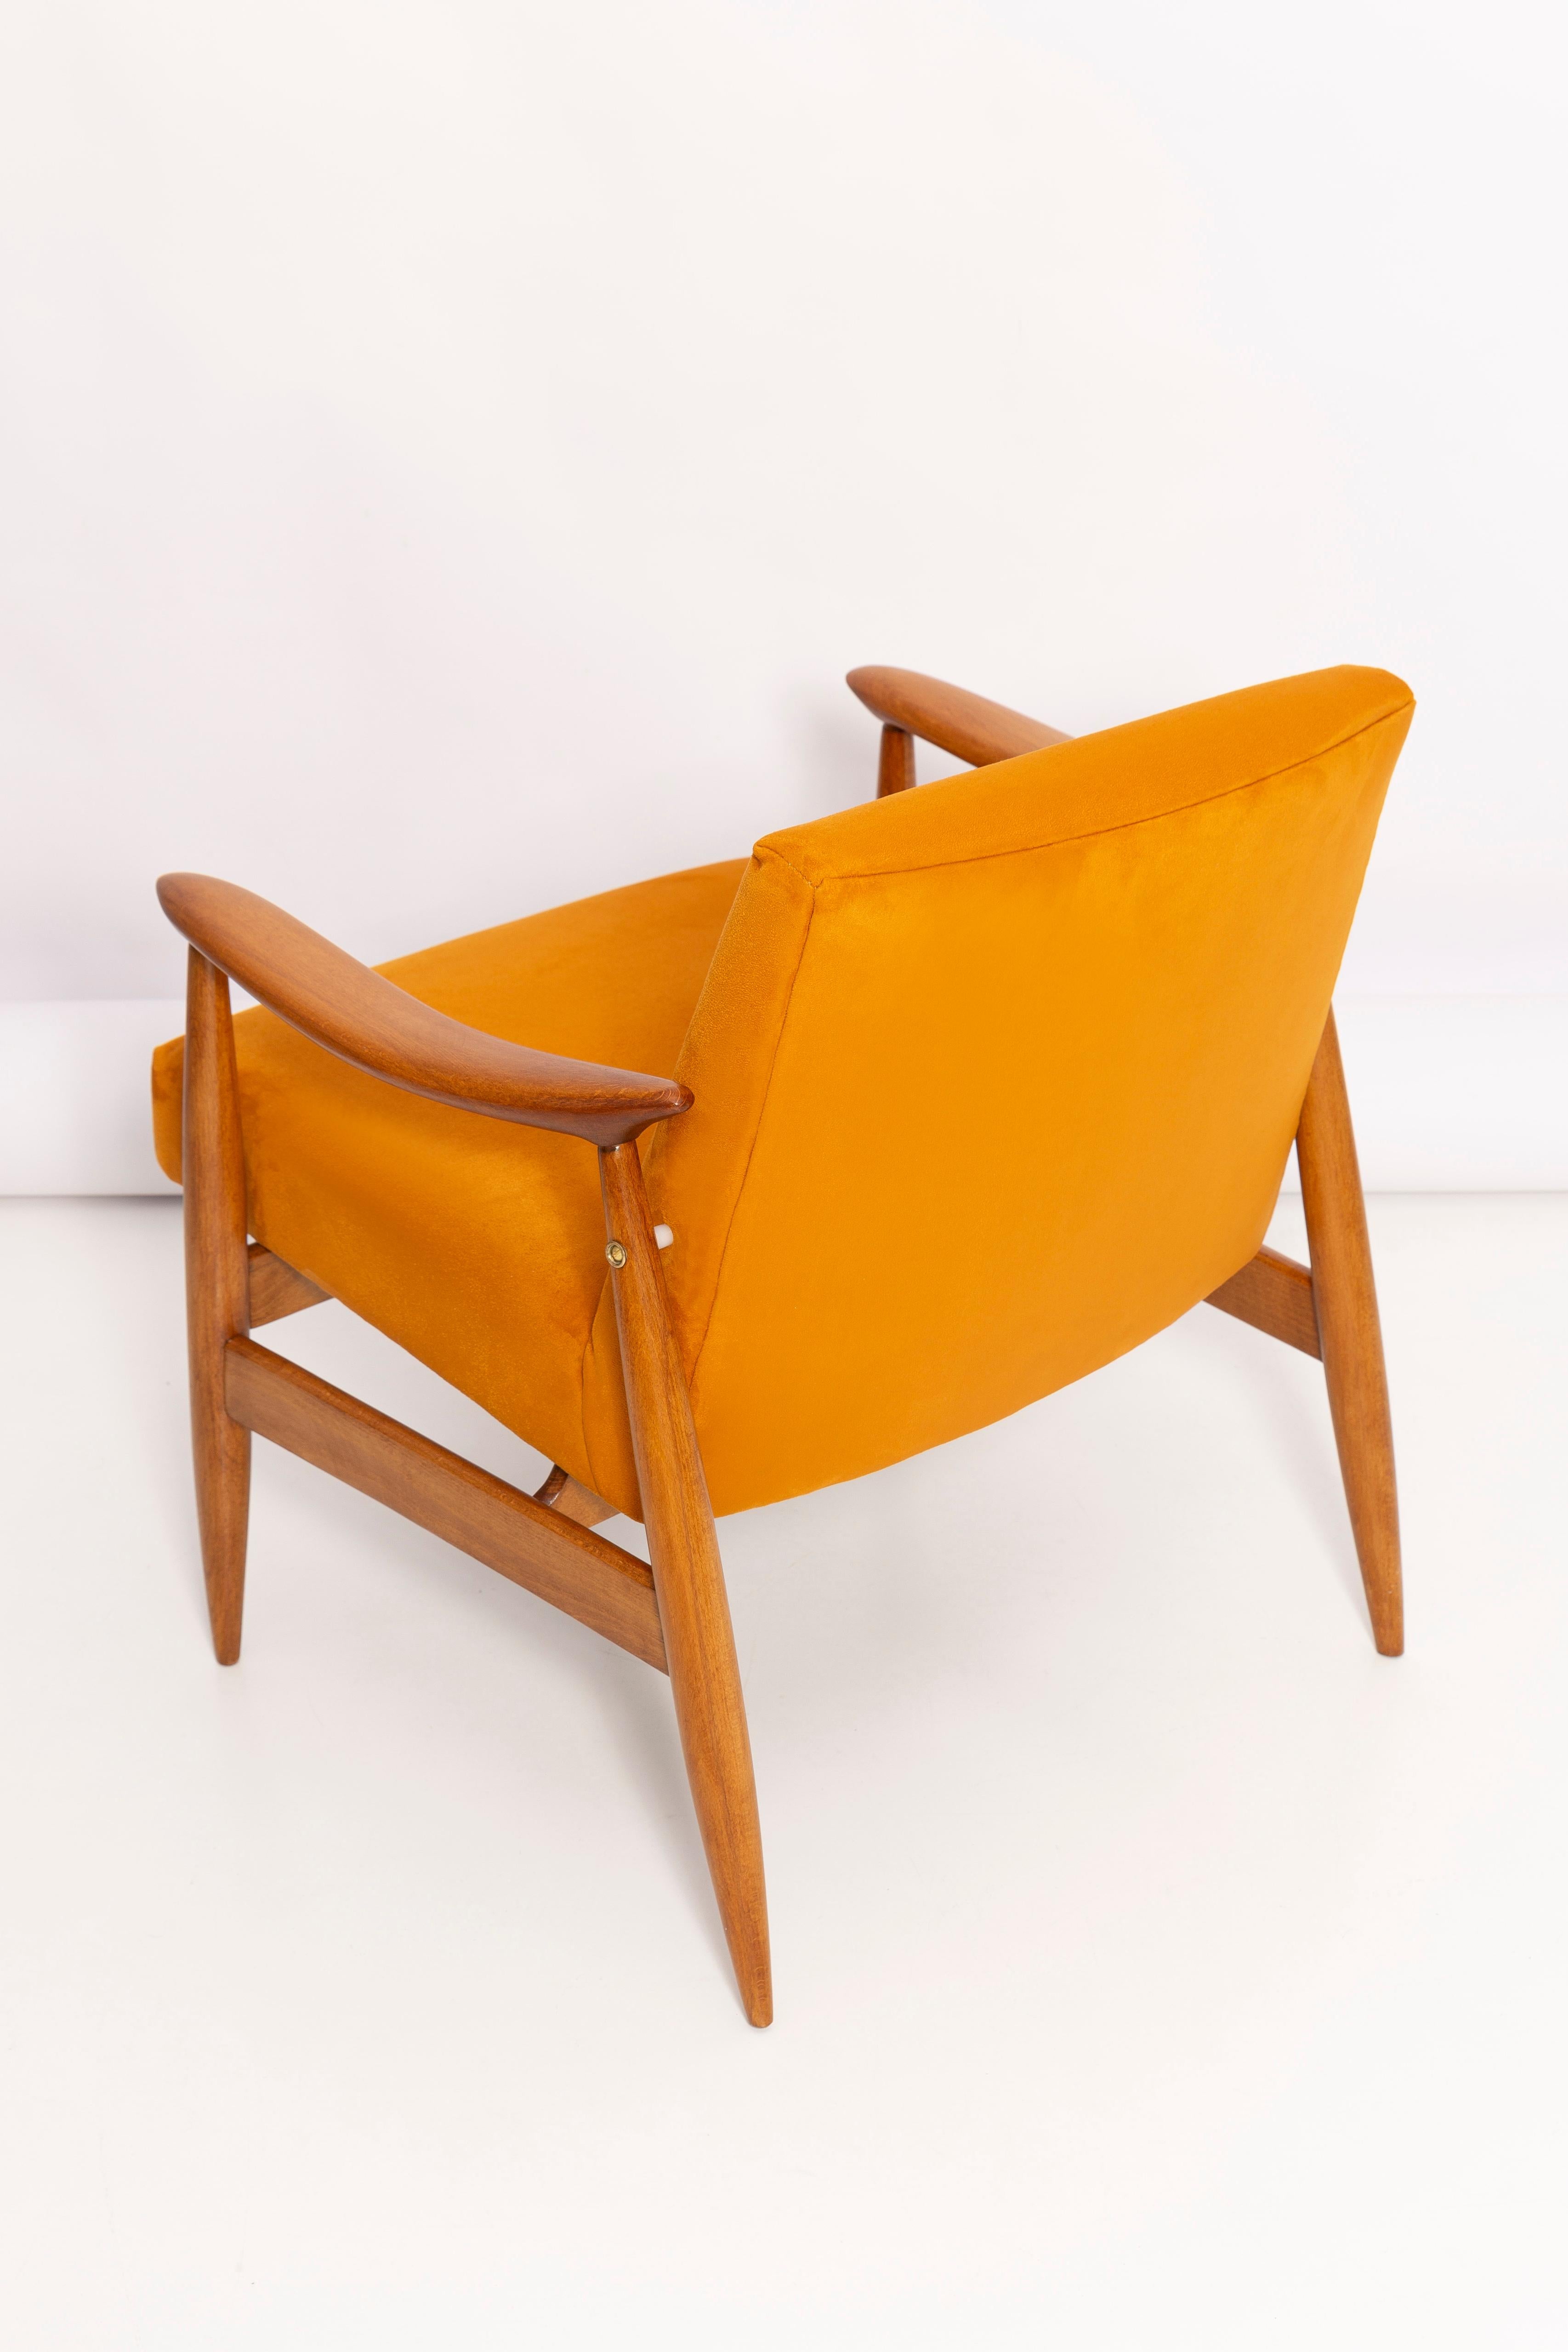 Pair of Mid Century Yellow Armchairs, Designed by J. Kedziorek, Poland, 1960s For Sale 4